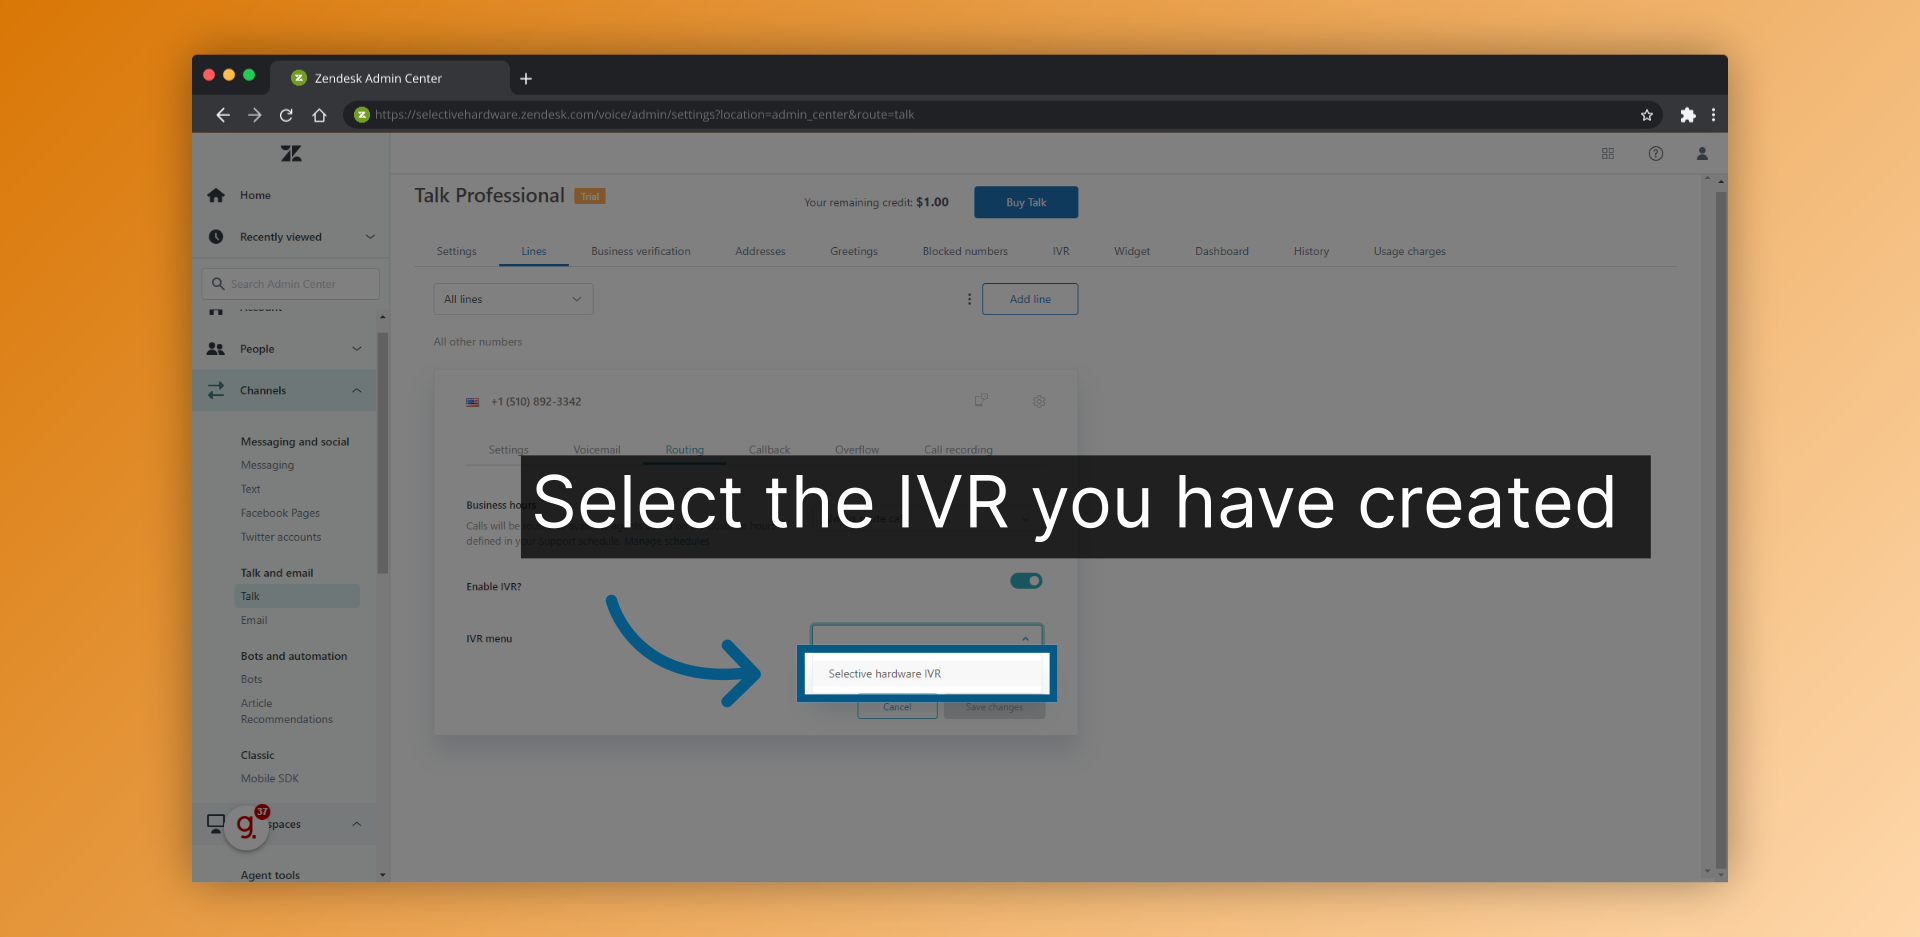 Select the IVR you have created